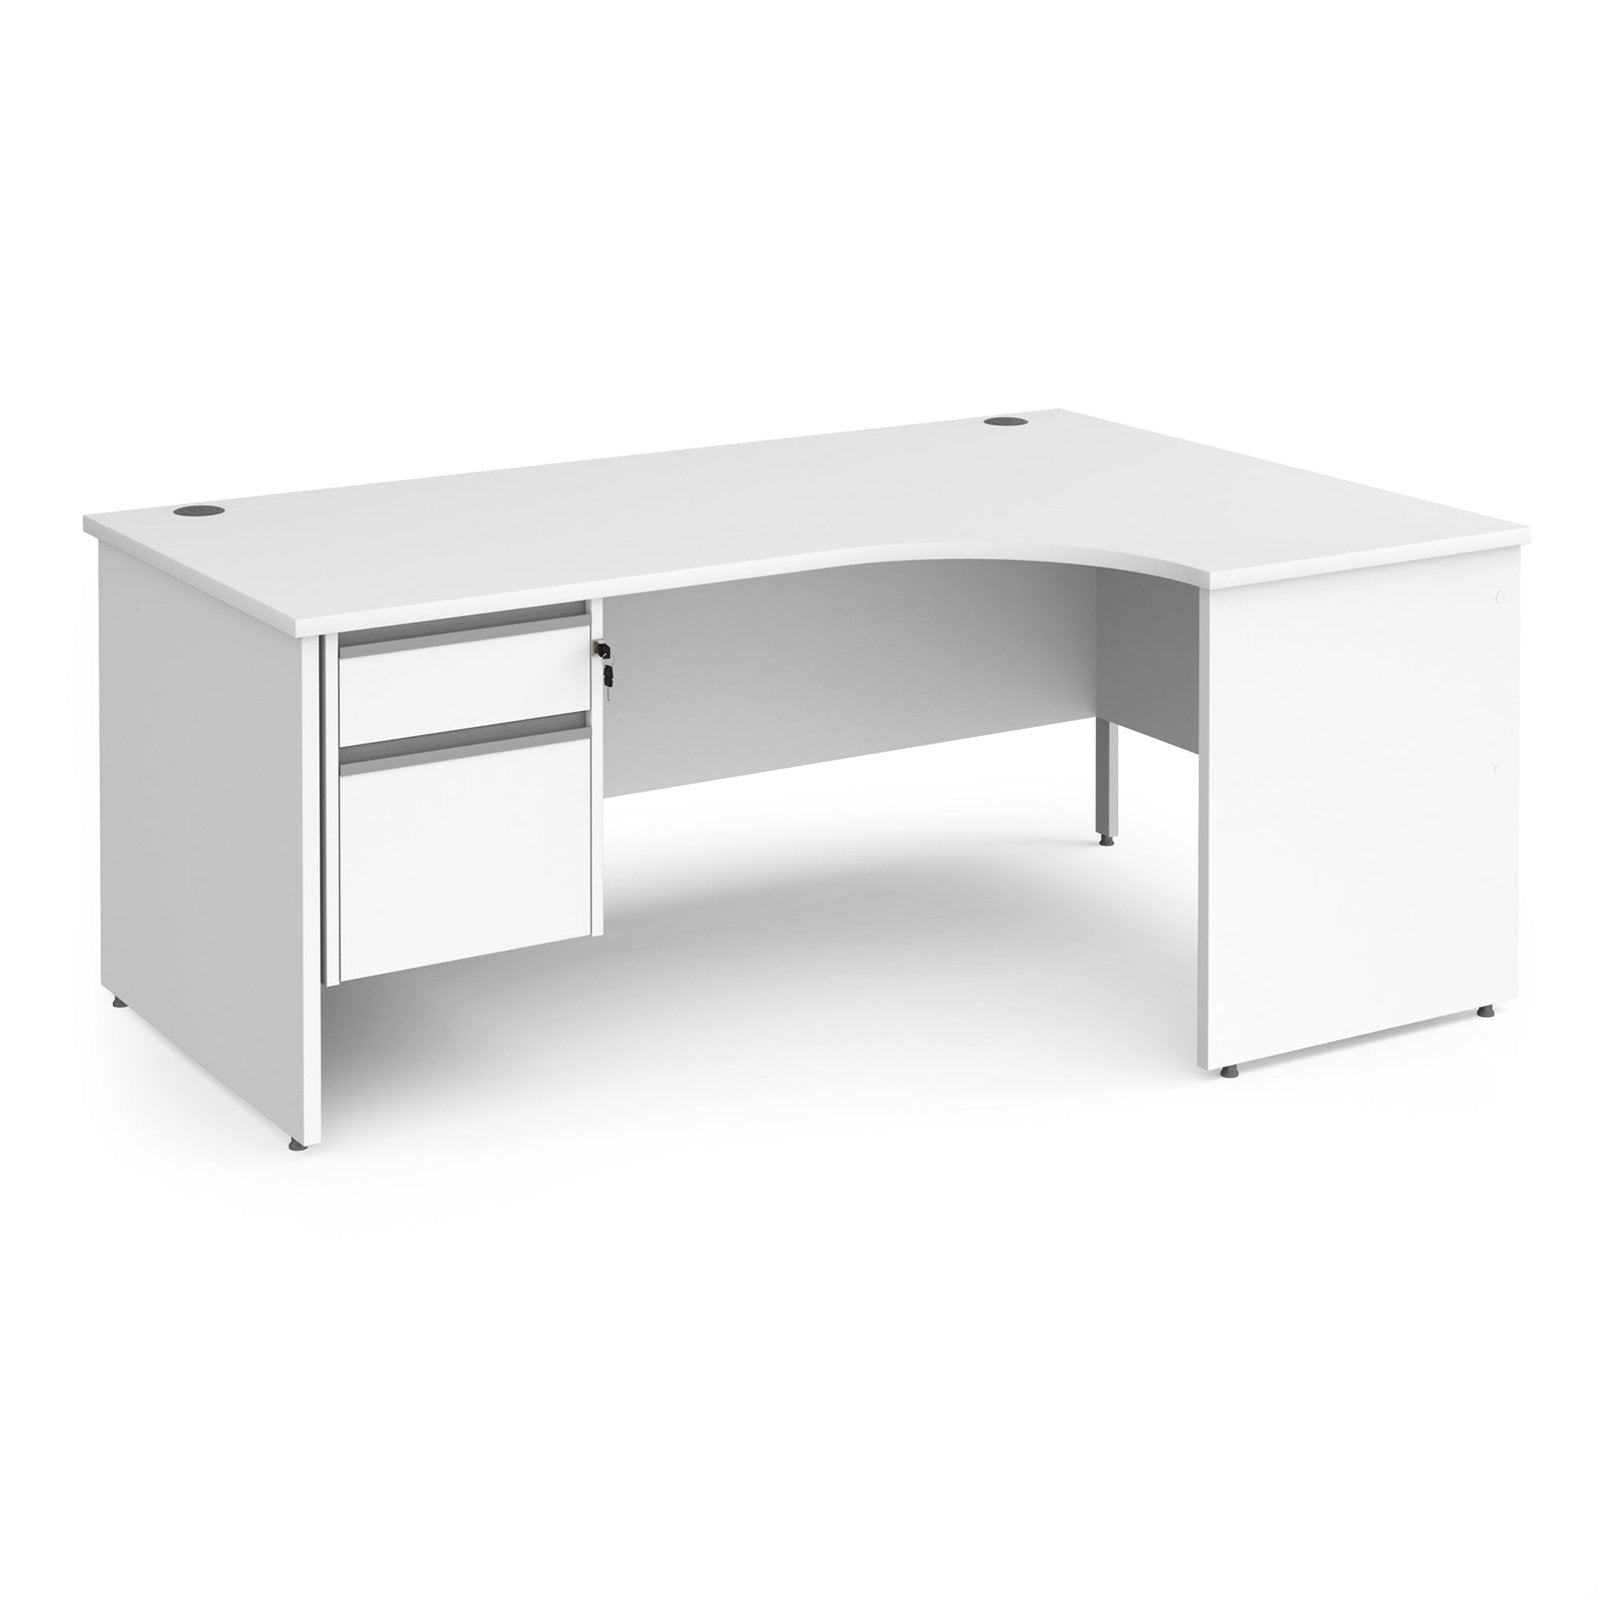 Contract 25 right hand ergonomic desk with 2 drawer pedestal and panel leg - Office Products Online